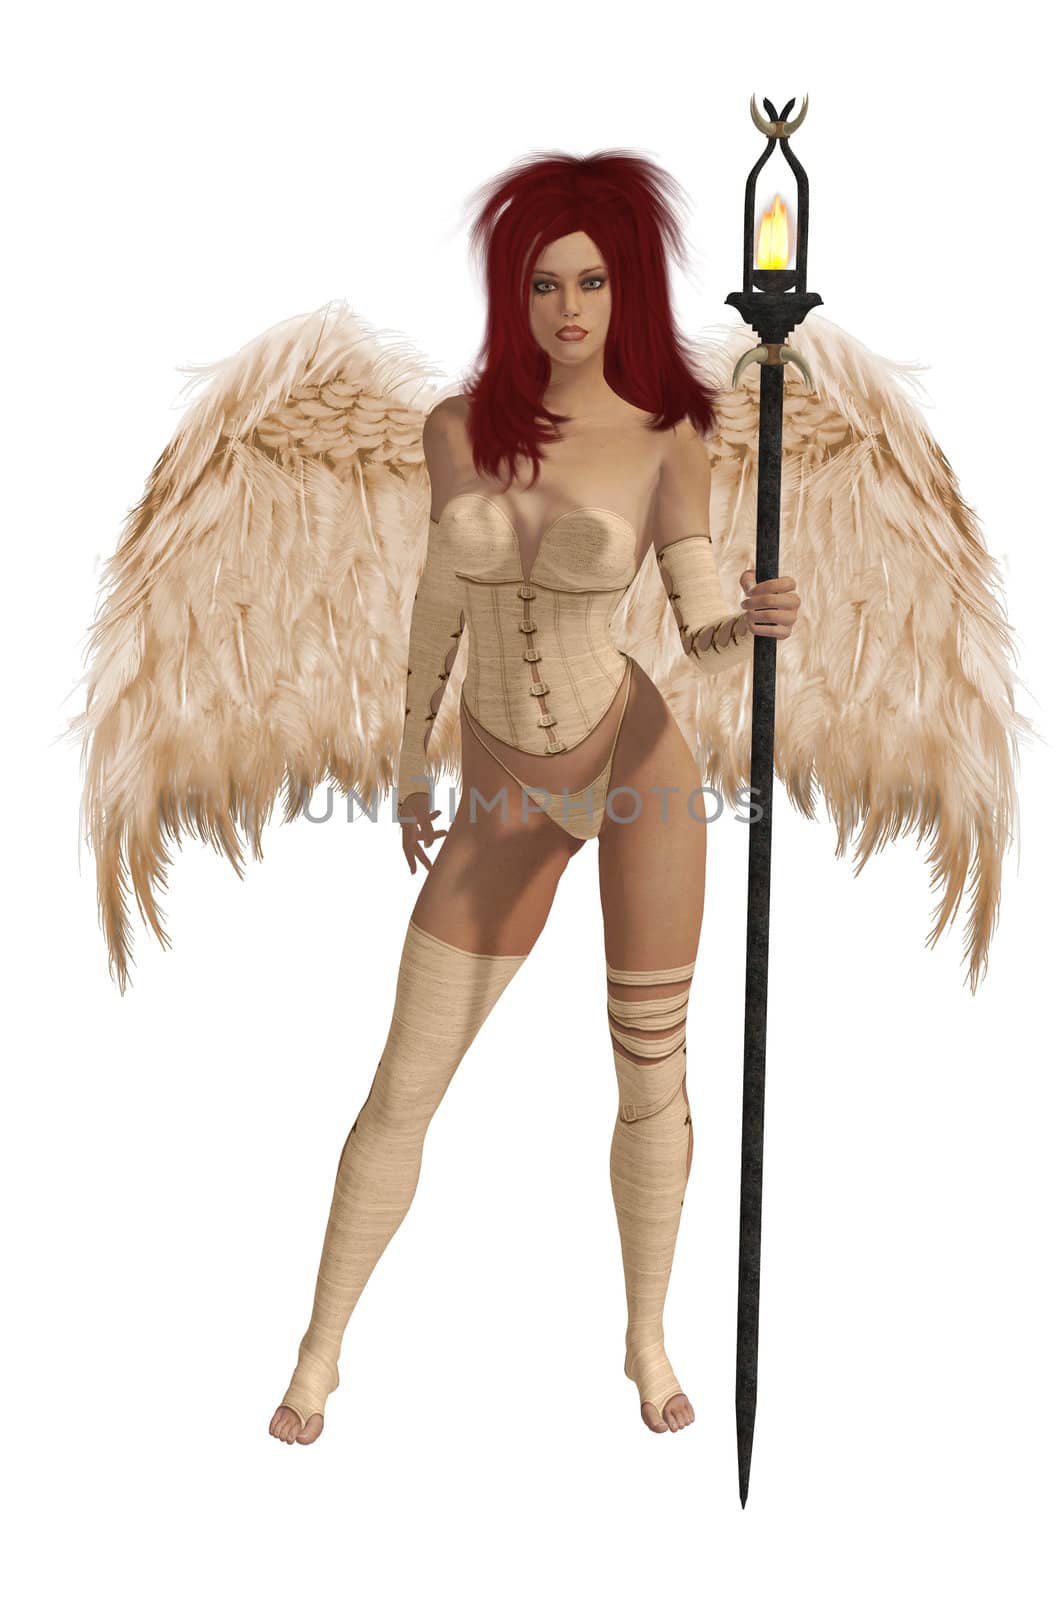 Beige Winged Angel With Red Hair by kathygold